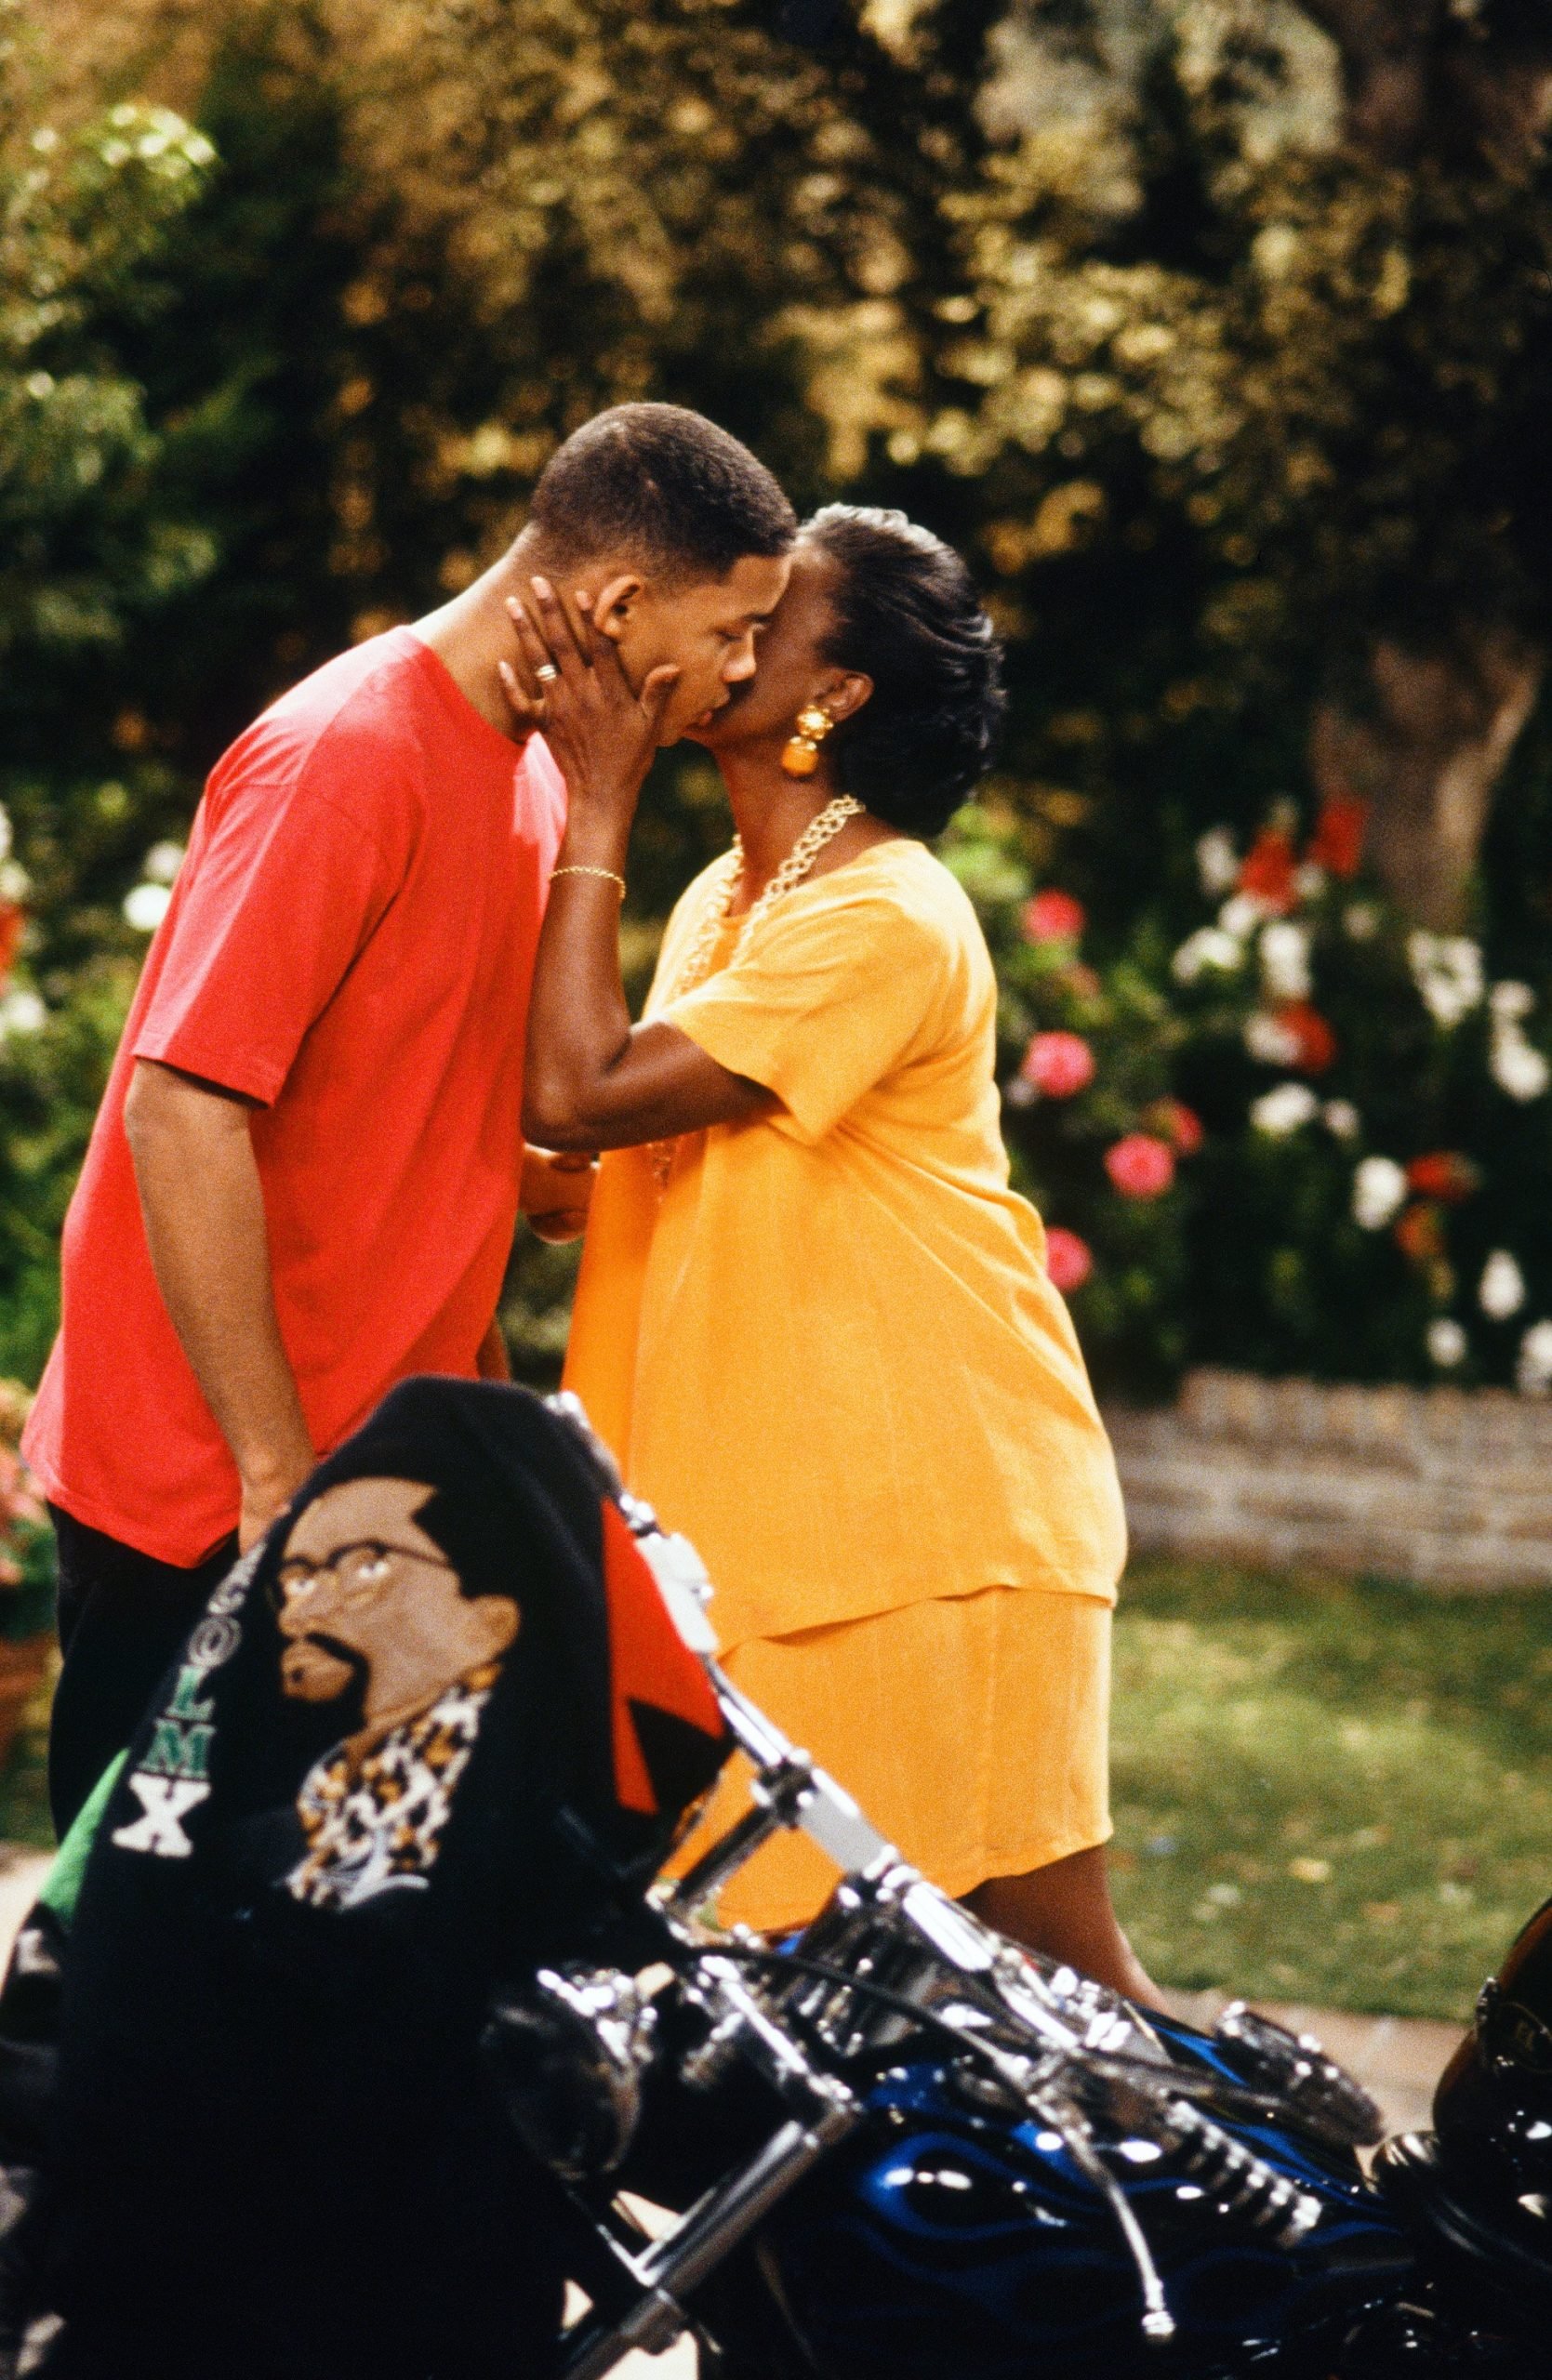 THE FRESH PRINCE OF BEL-AIR -- "P.S. I Love You" Episode 6 -- Pictured: (l-r) Janet Hubert as Vivian Banks